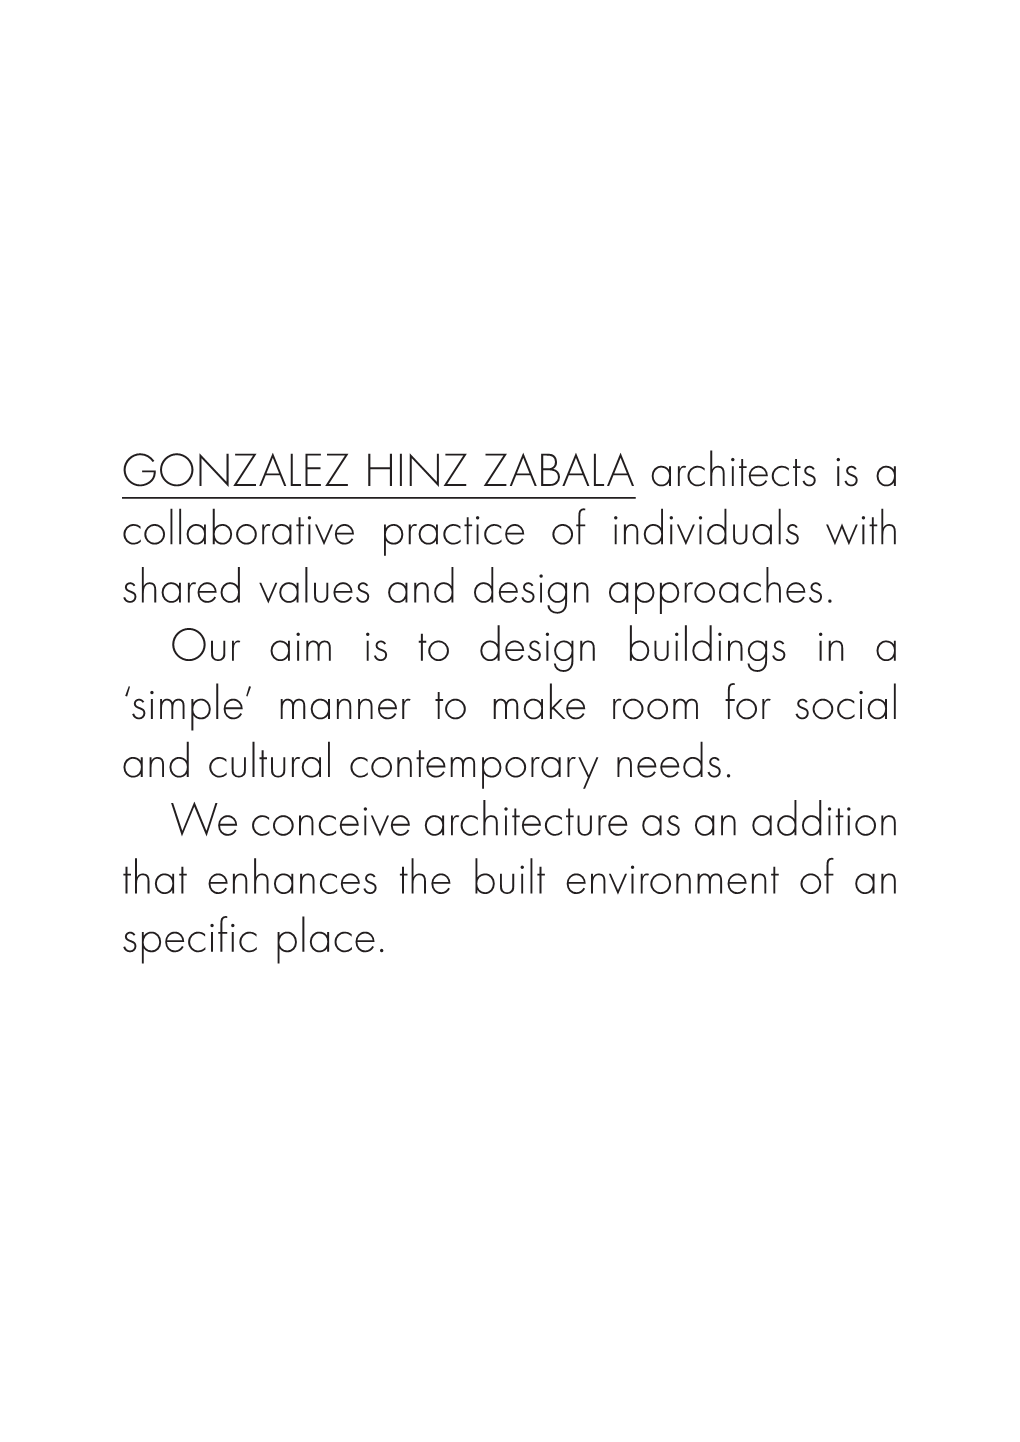 GONZALEZ HINZ ZABALA Architects Is a Collaborative Practice of Individuals with Shared Values and Design Approaches